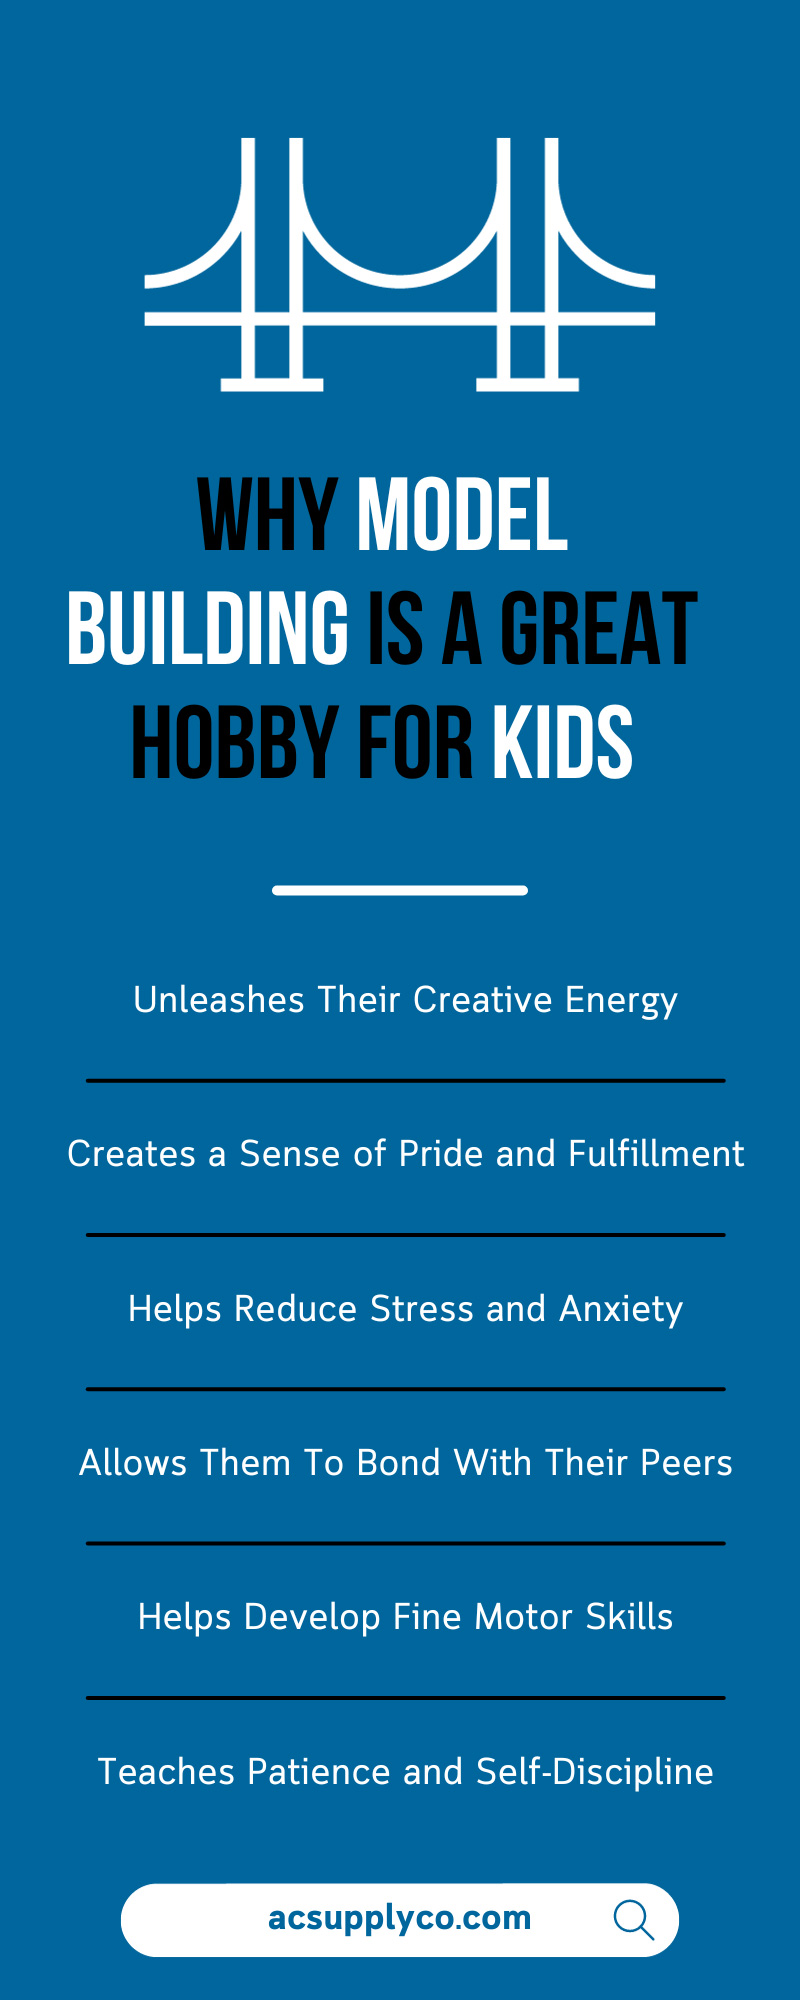 Why Model Building Is a Great Hobby for Kids